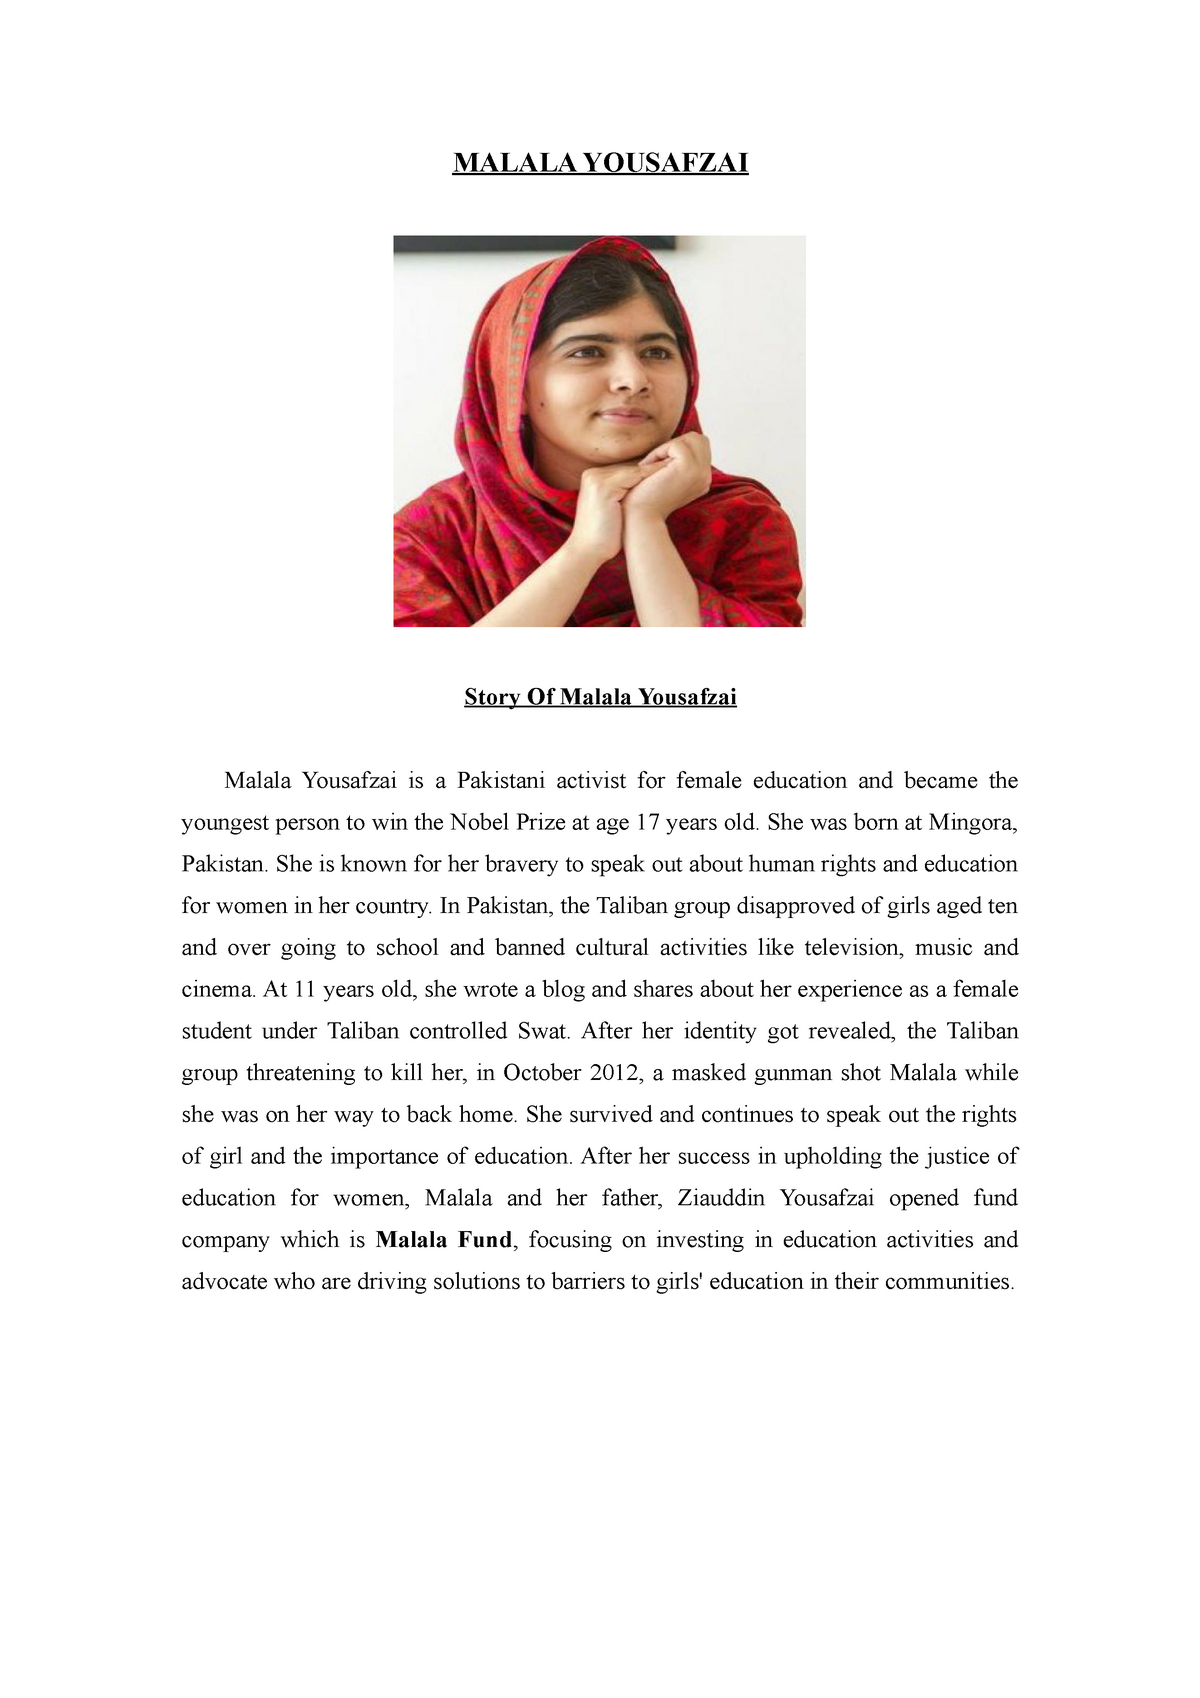 thesis statement for malala speech